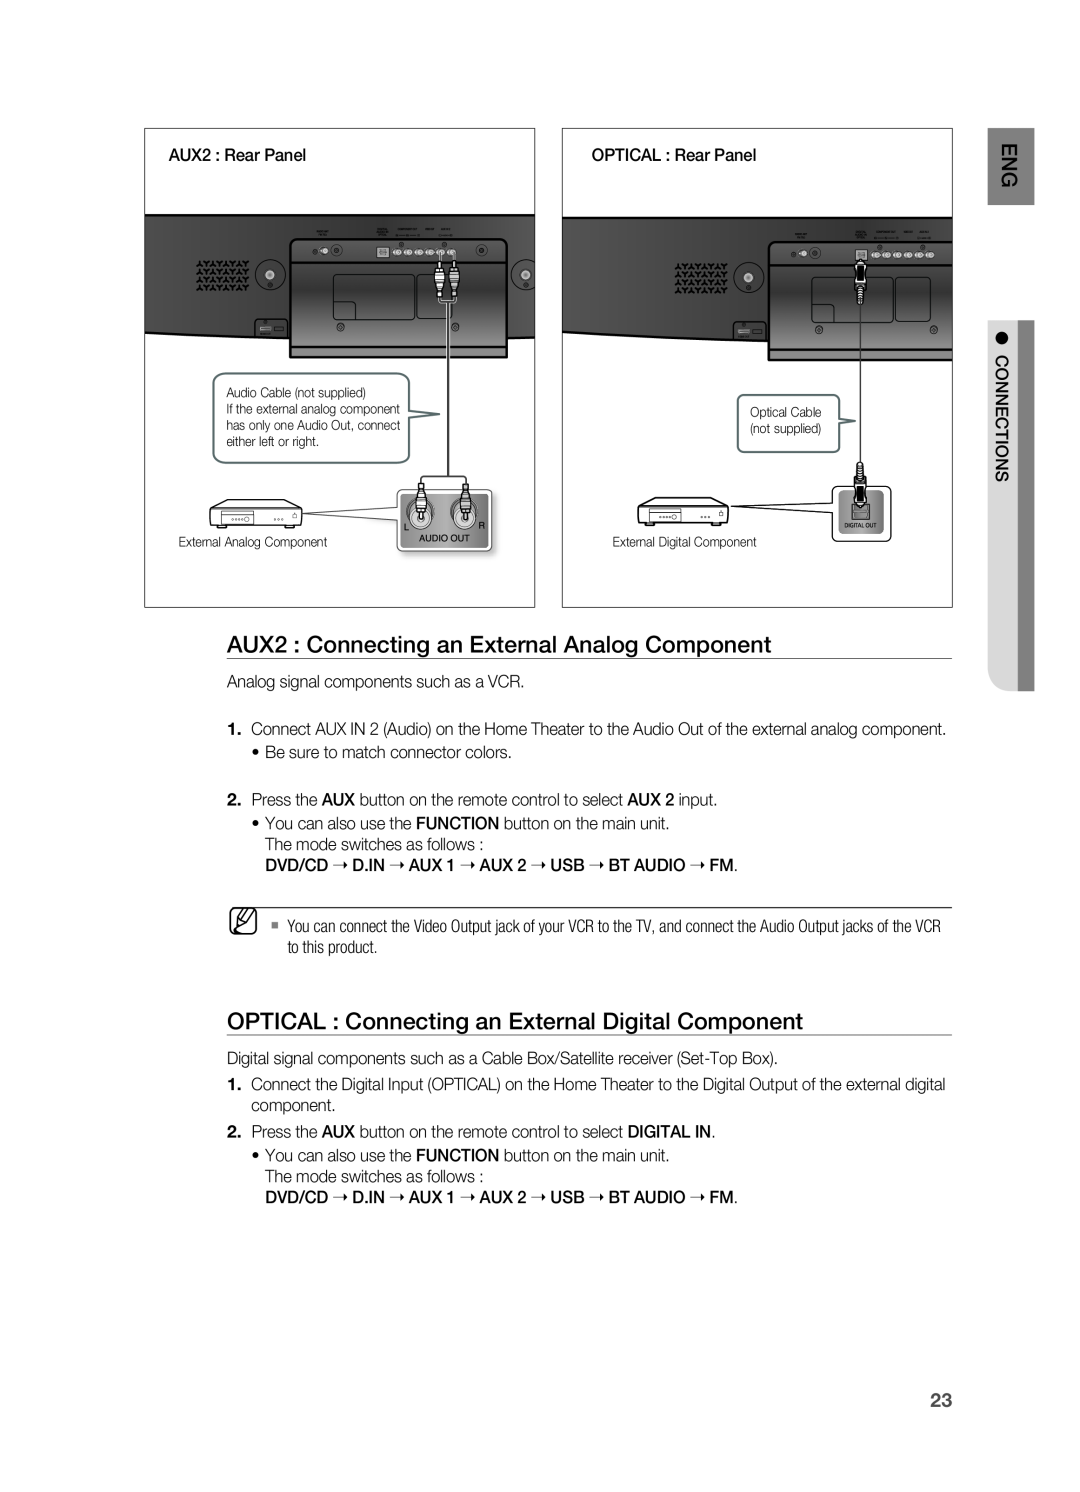 Sony HT-X810 user manual AUX2 Connecting an External Analog Component, OPTICAl Connecting an External Digital Component 